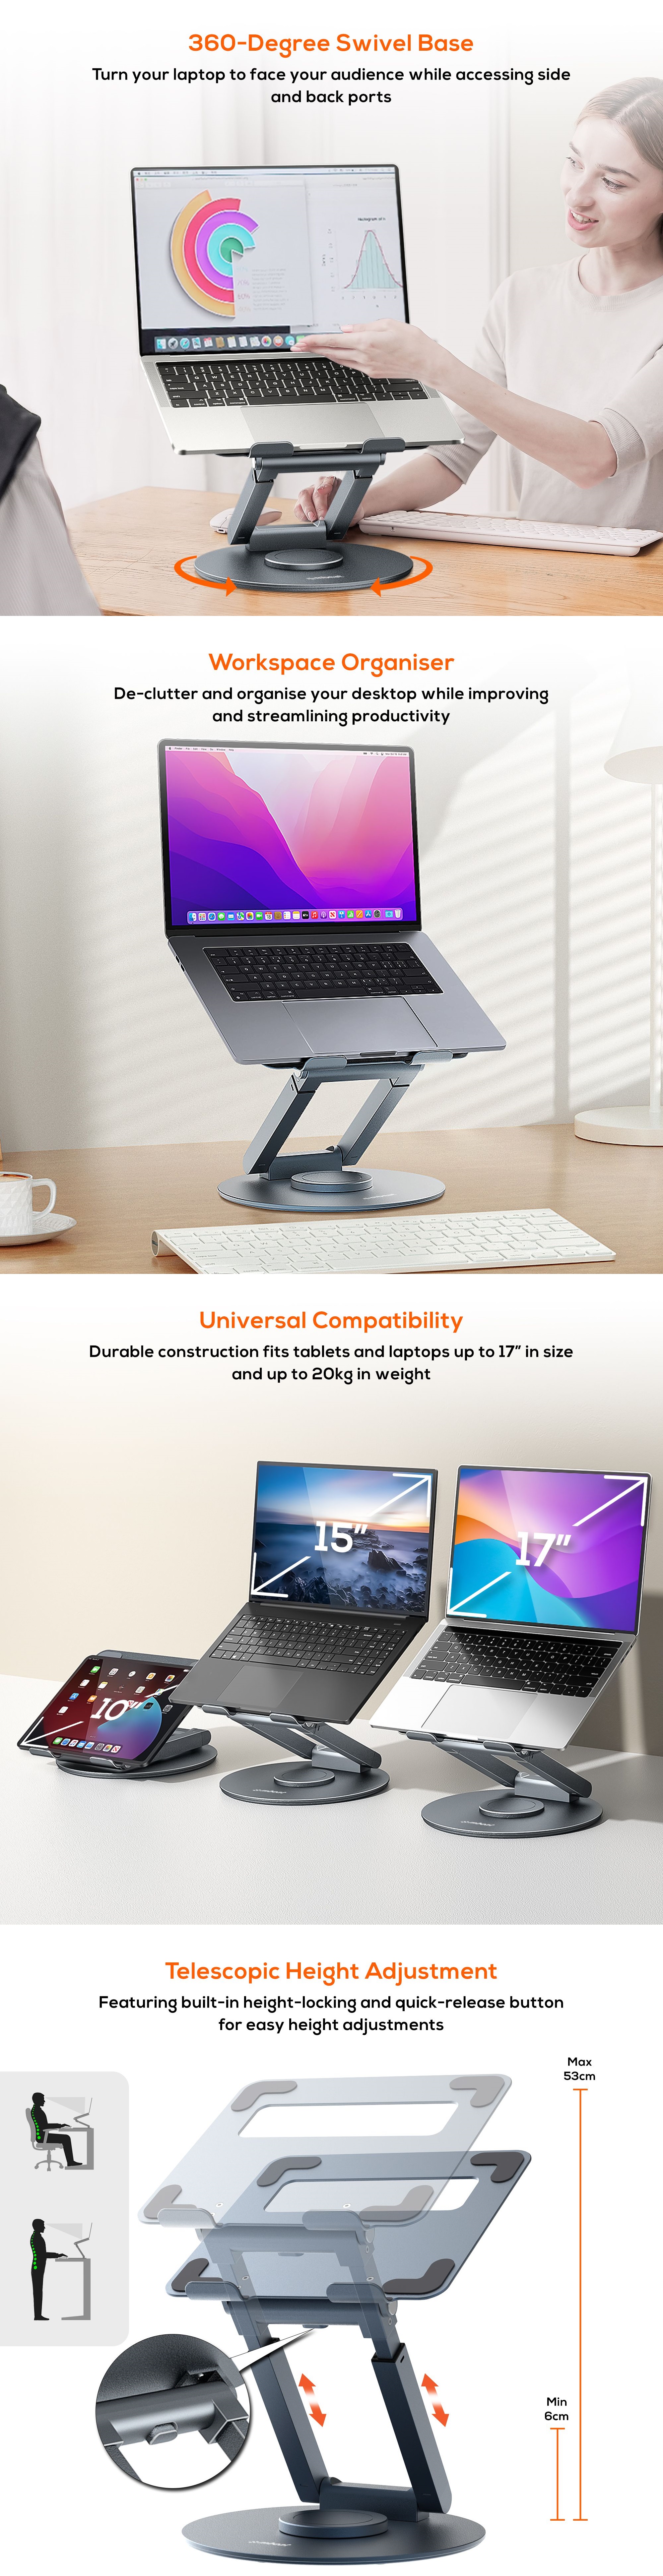 A large marketing image providing additional information about the product mBeat Stage S9 360 Degrees Rotating Notebook Stand w/ Telescopic Height Adjustment - Additional alt info not provided